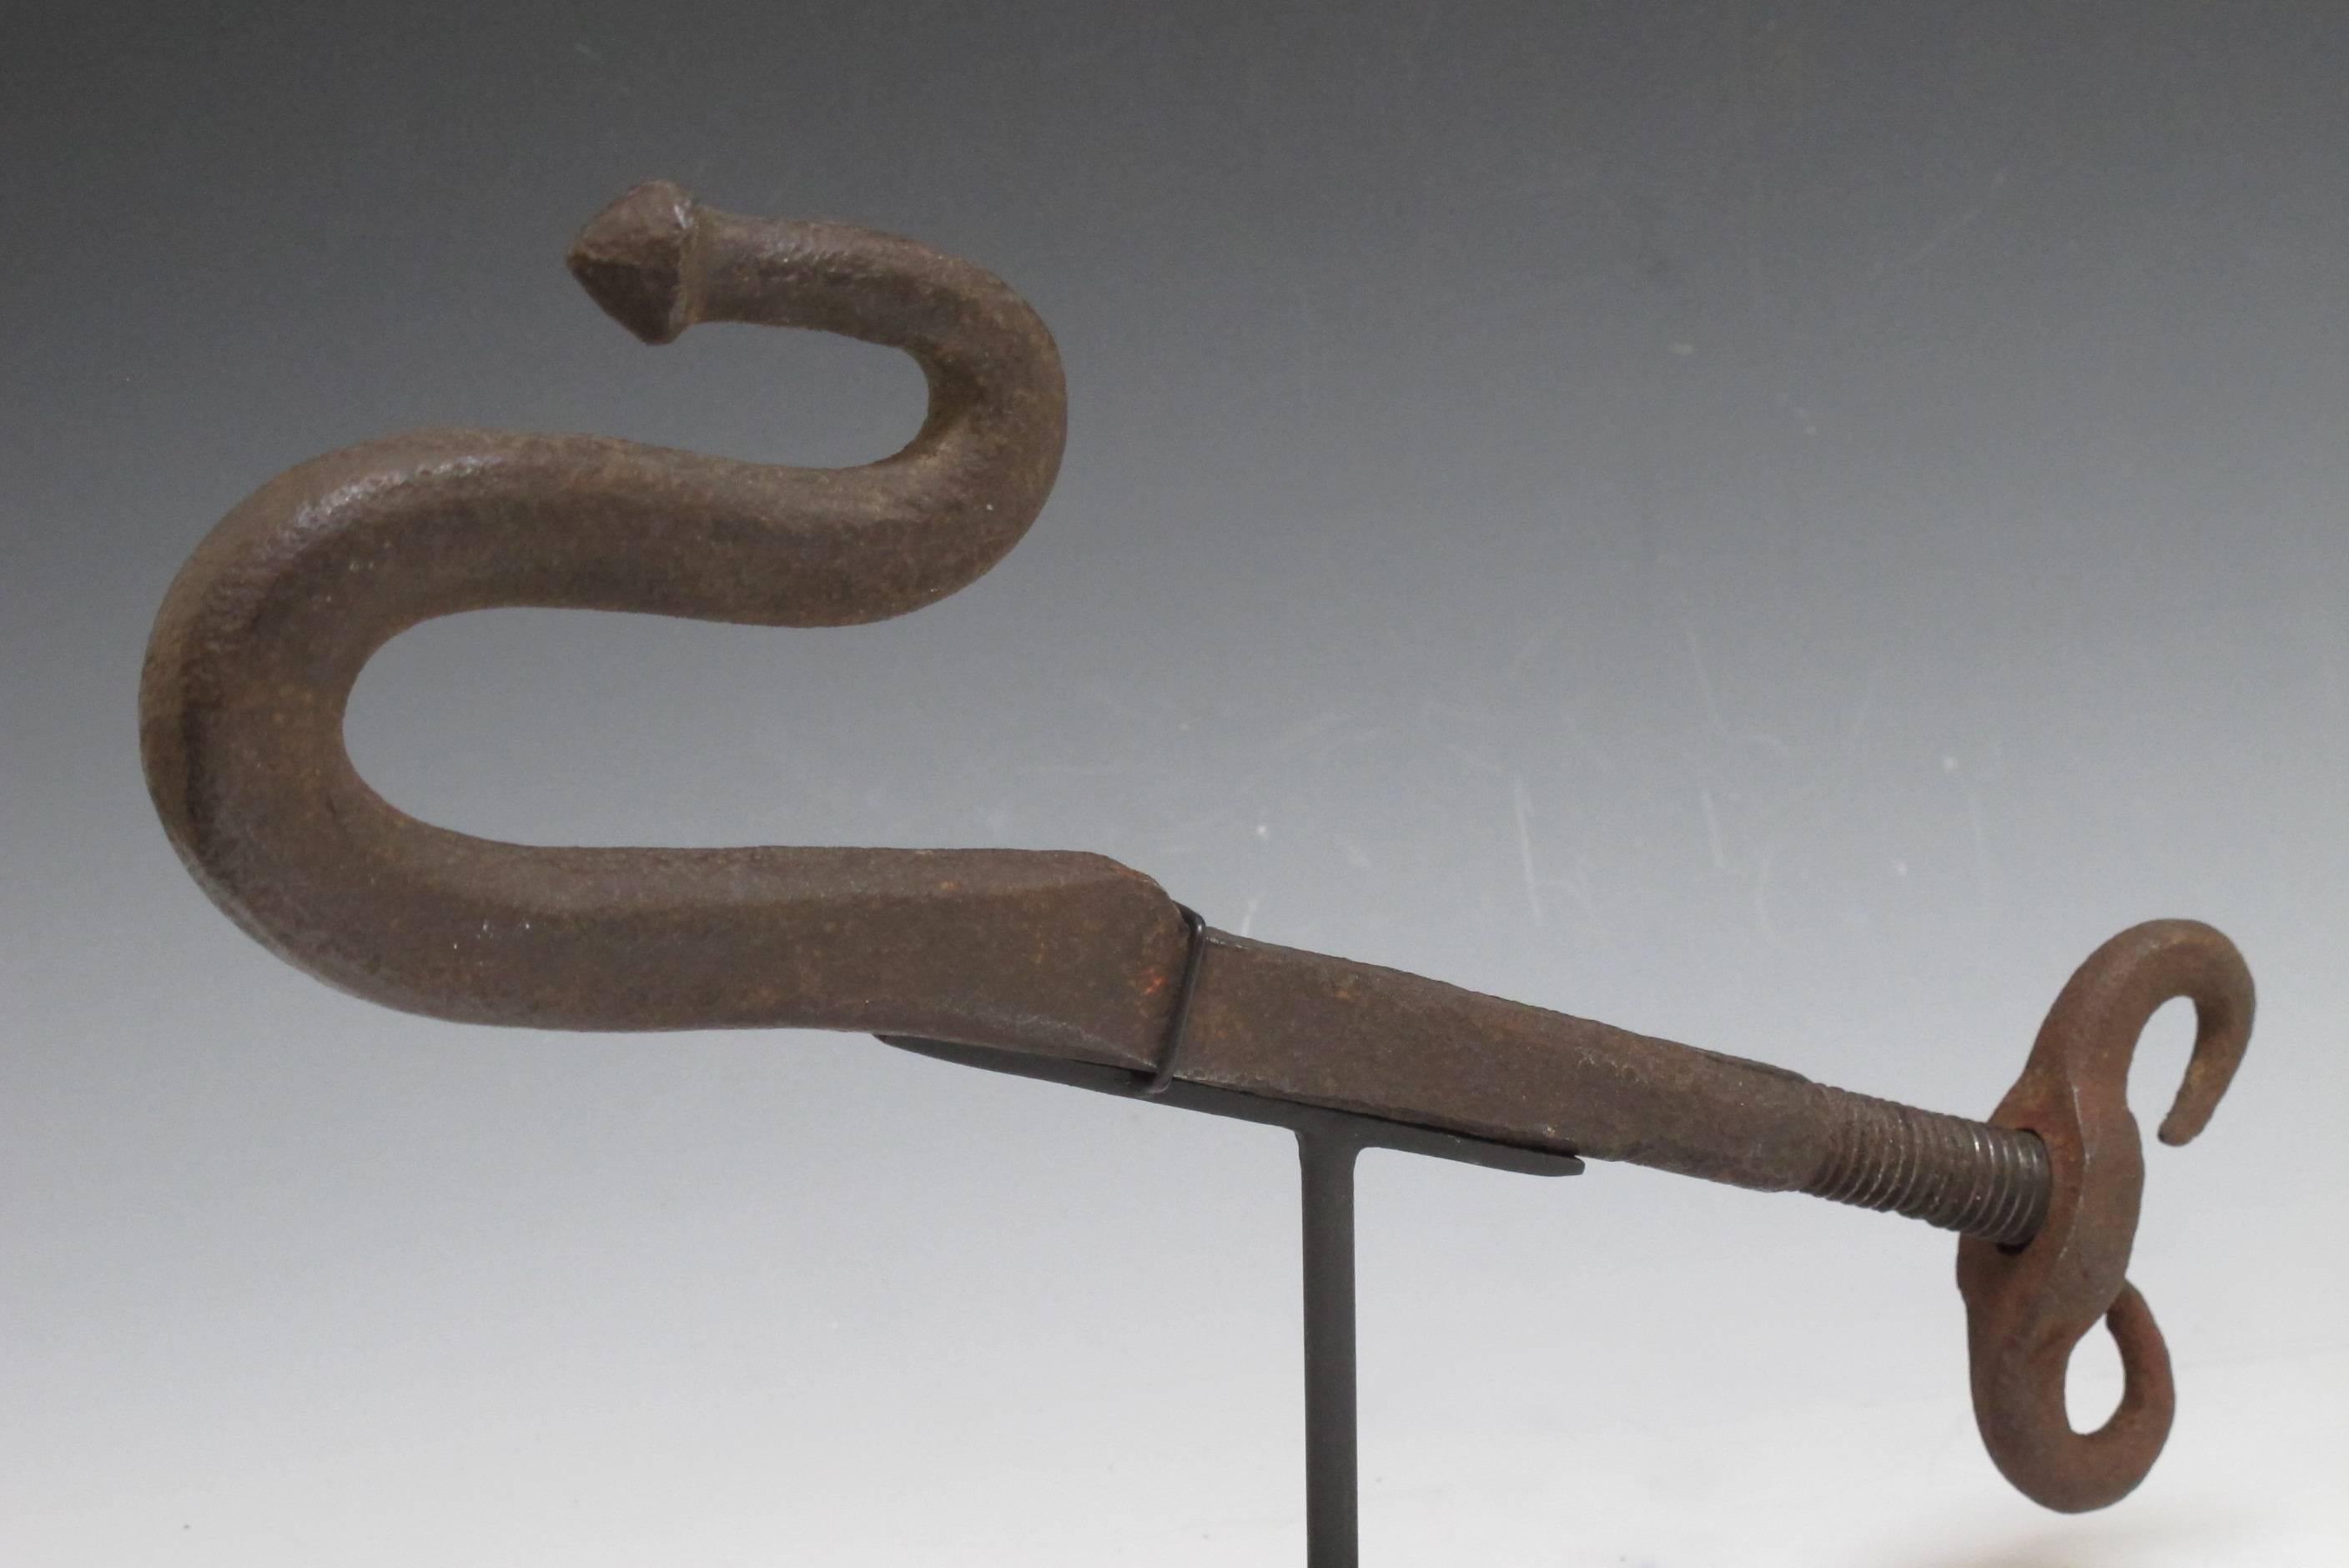 Blacksmith forged iron snake form hook made  to mount on a conestoga wagon 
to hold provisions on the journey west.The hook goes into a square shaft which was threaded at the end to receive a winged nut. From the famed Sorber collection of early